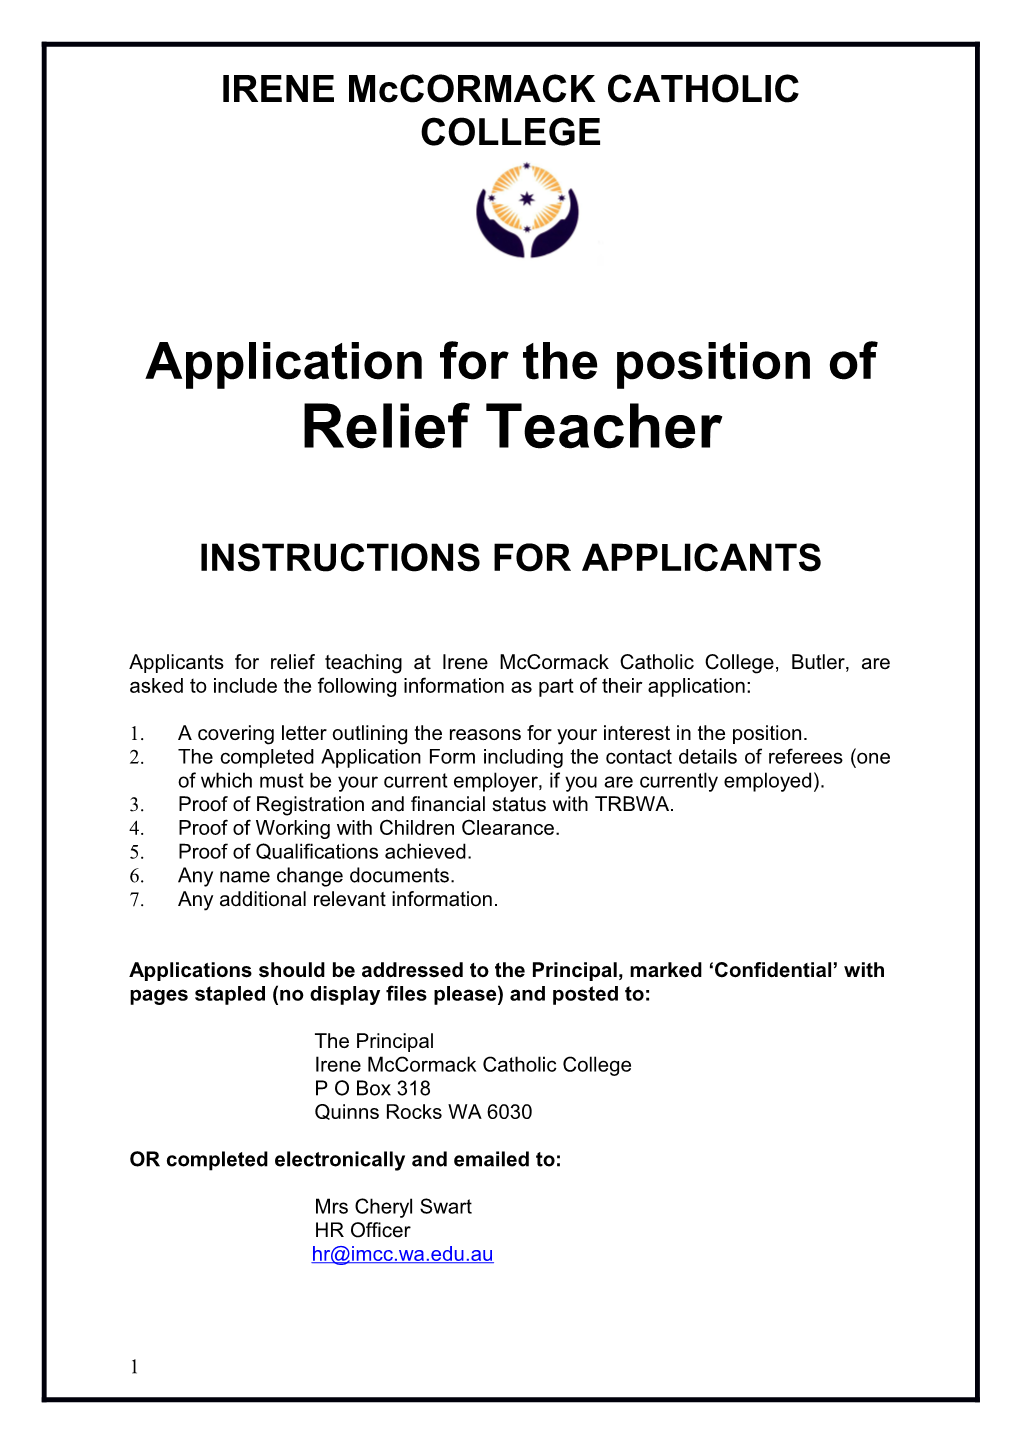 Application for the Position of Teacher